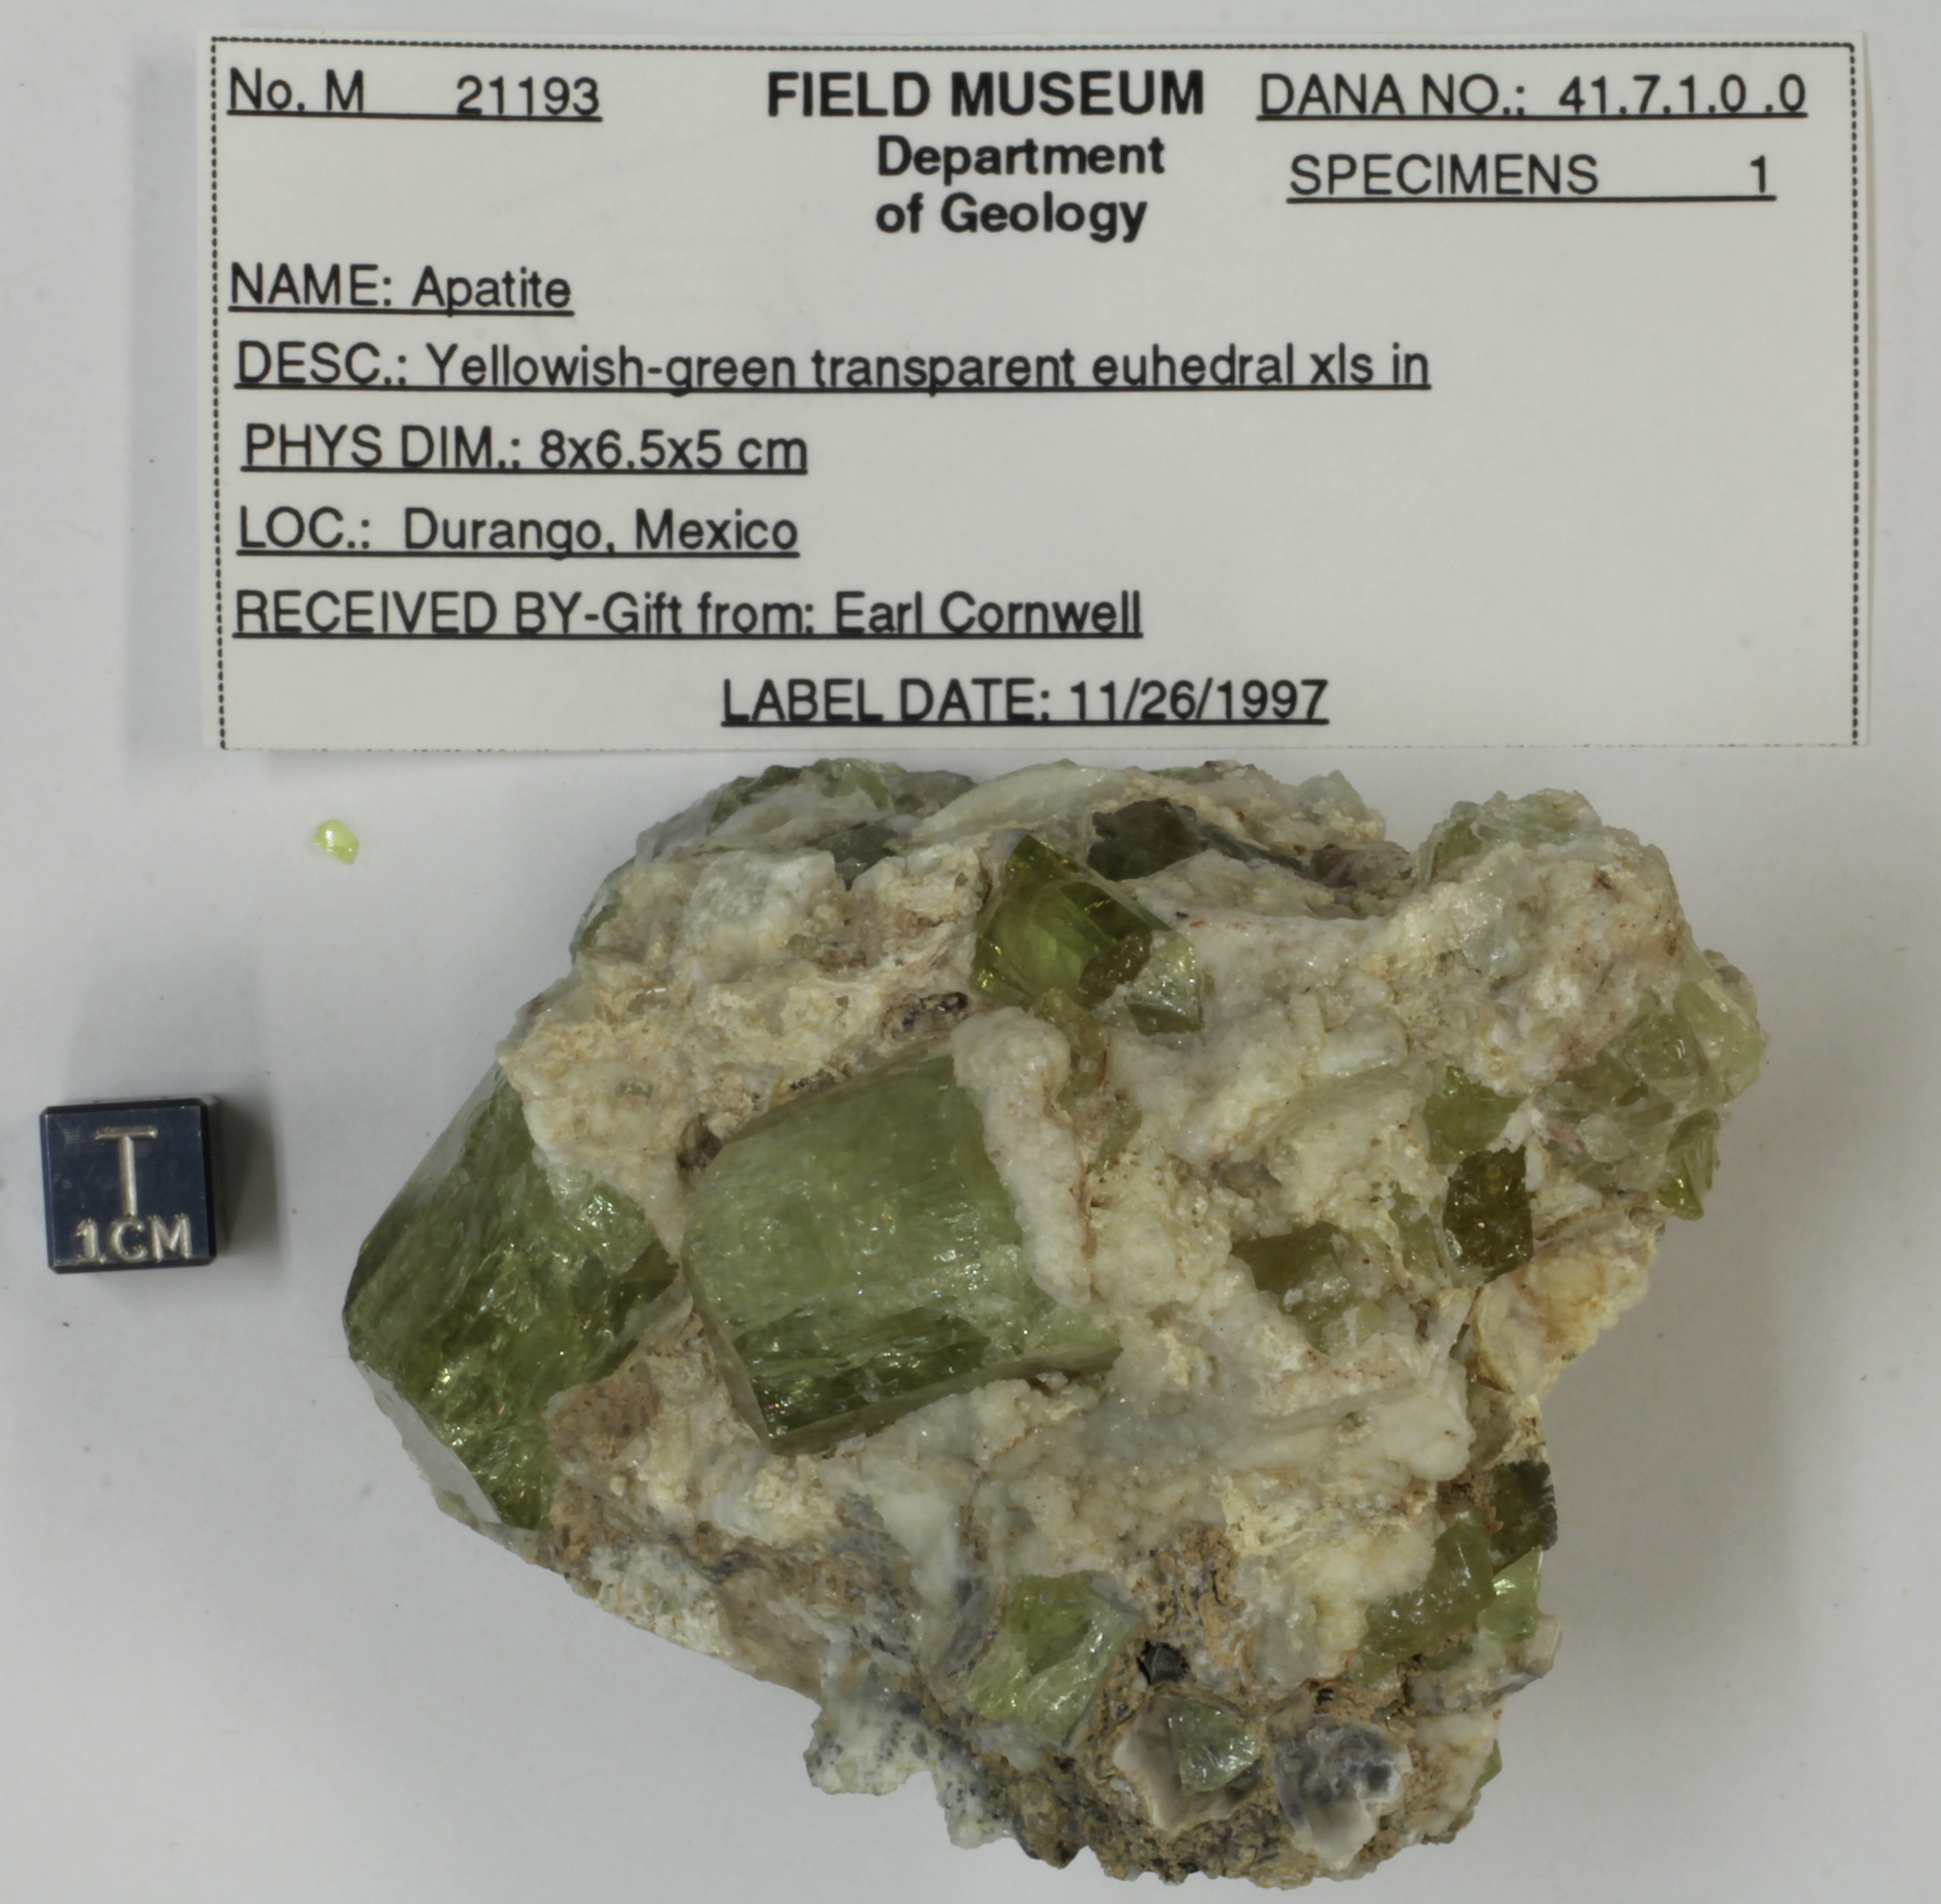 A stone with chunks of green mineral